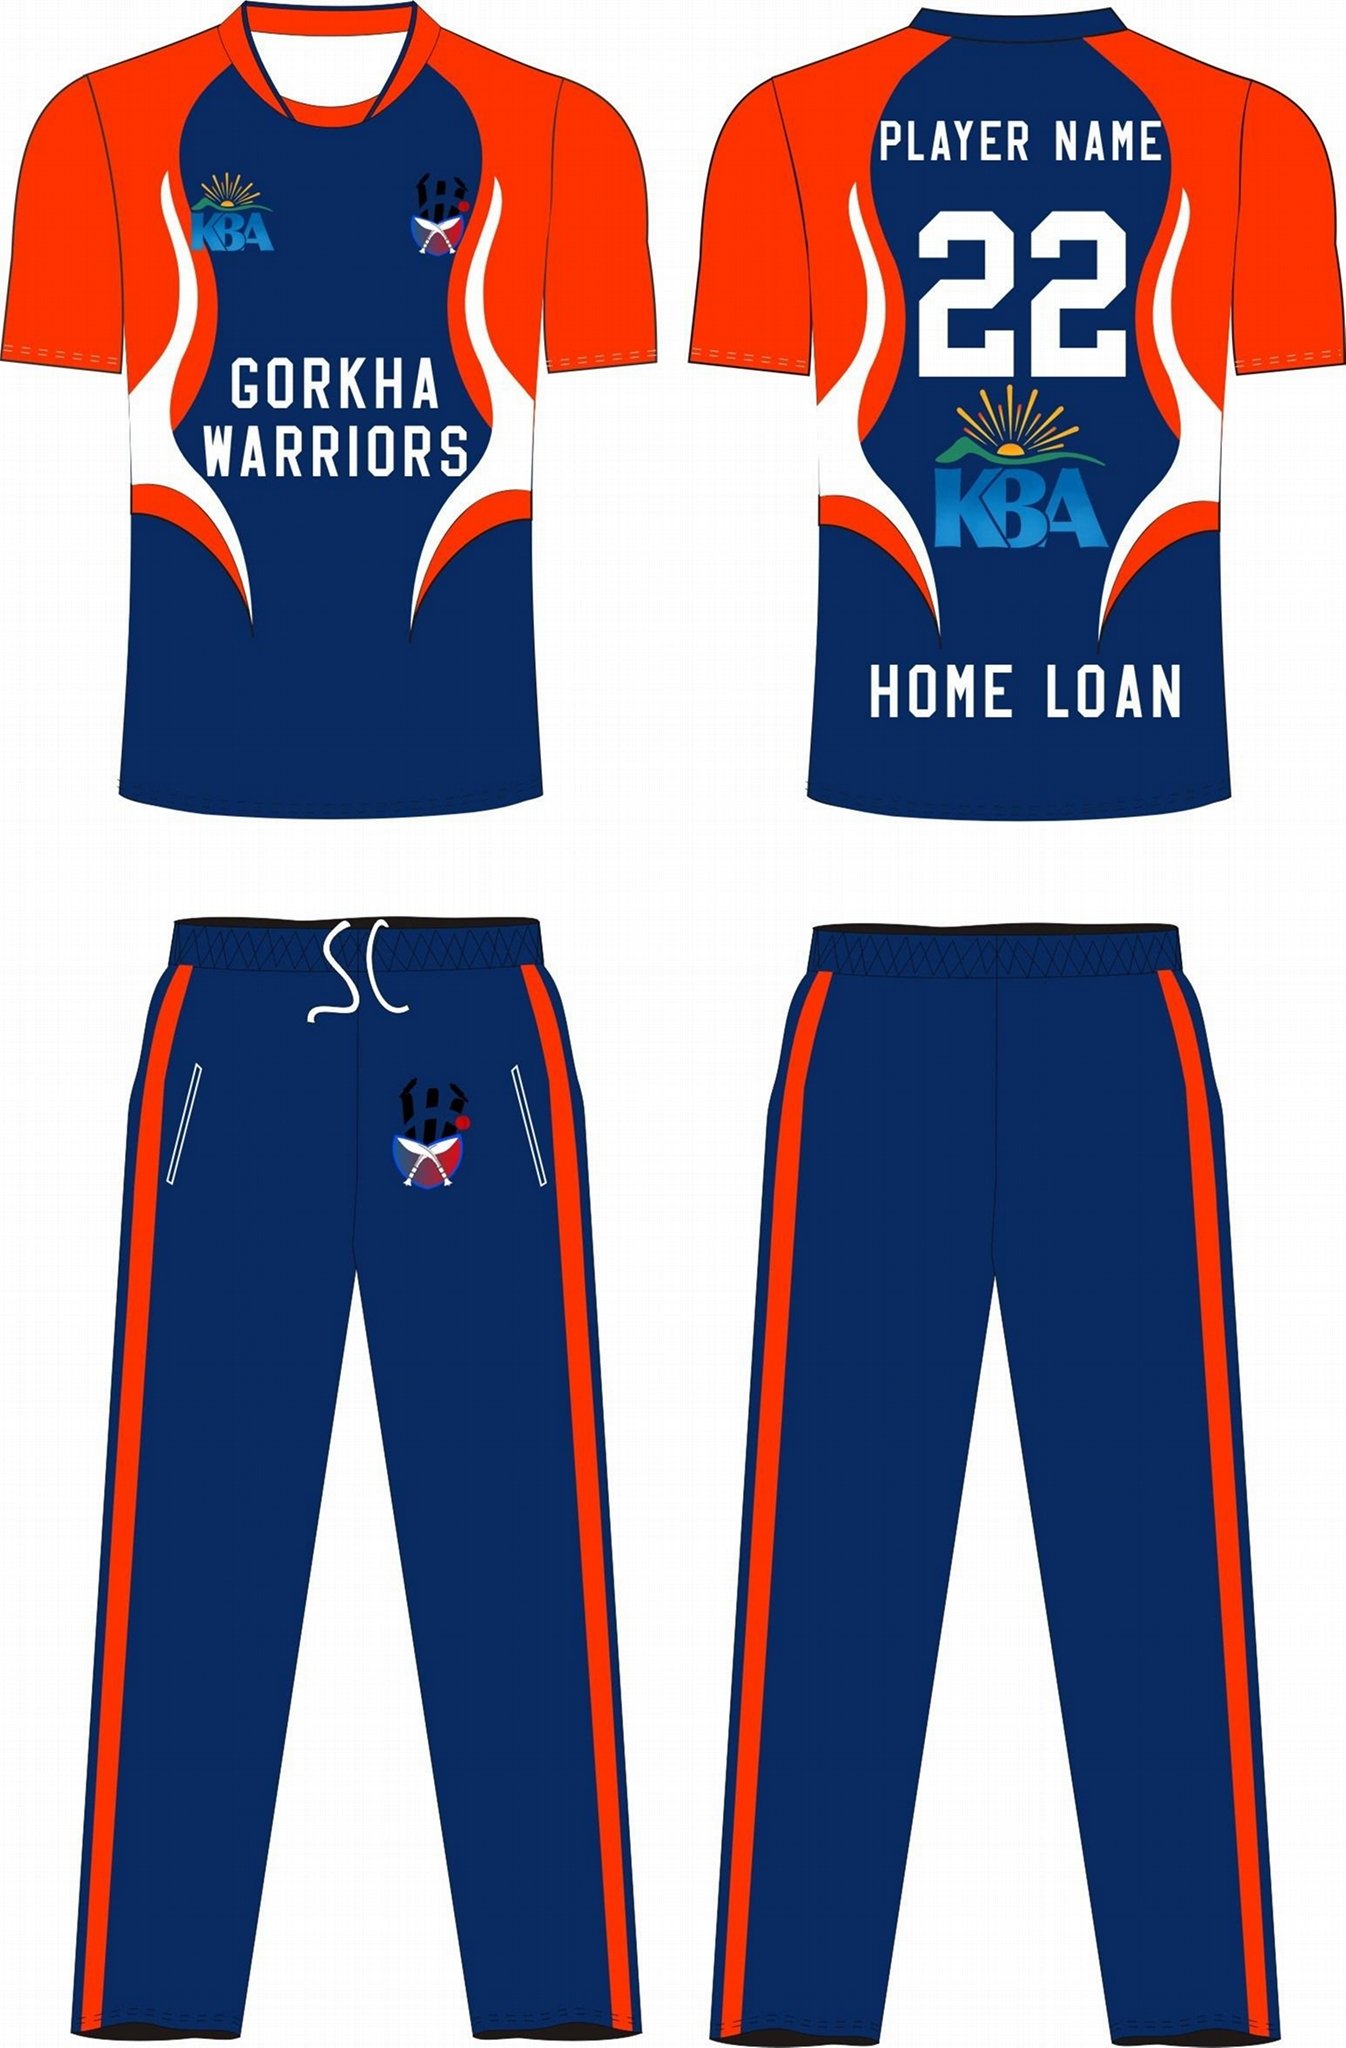 customized t shirts for cricket